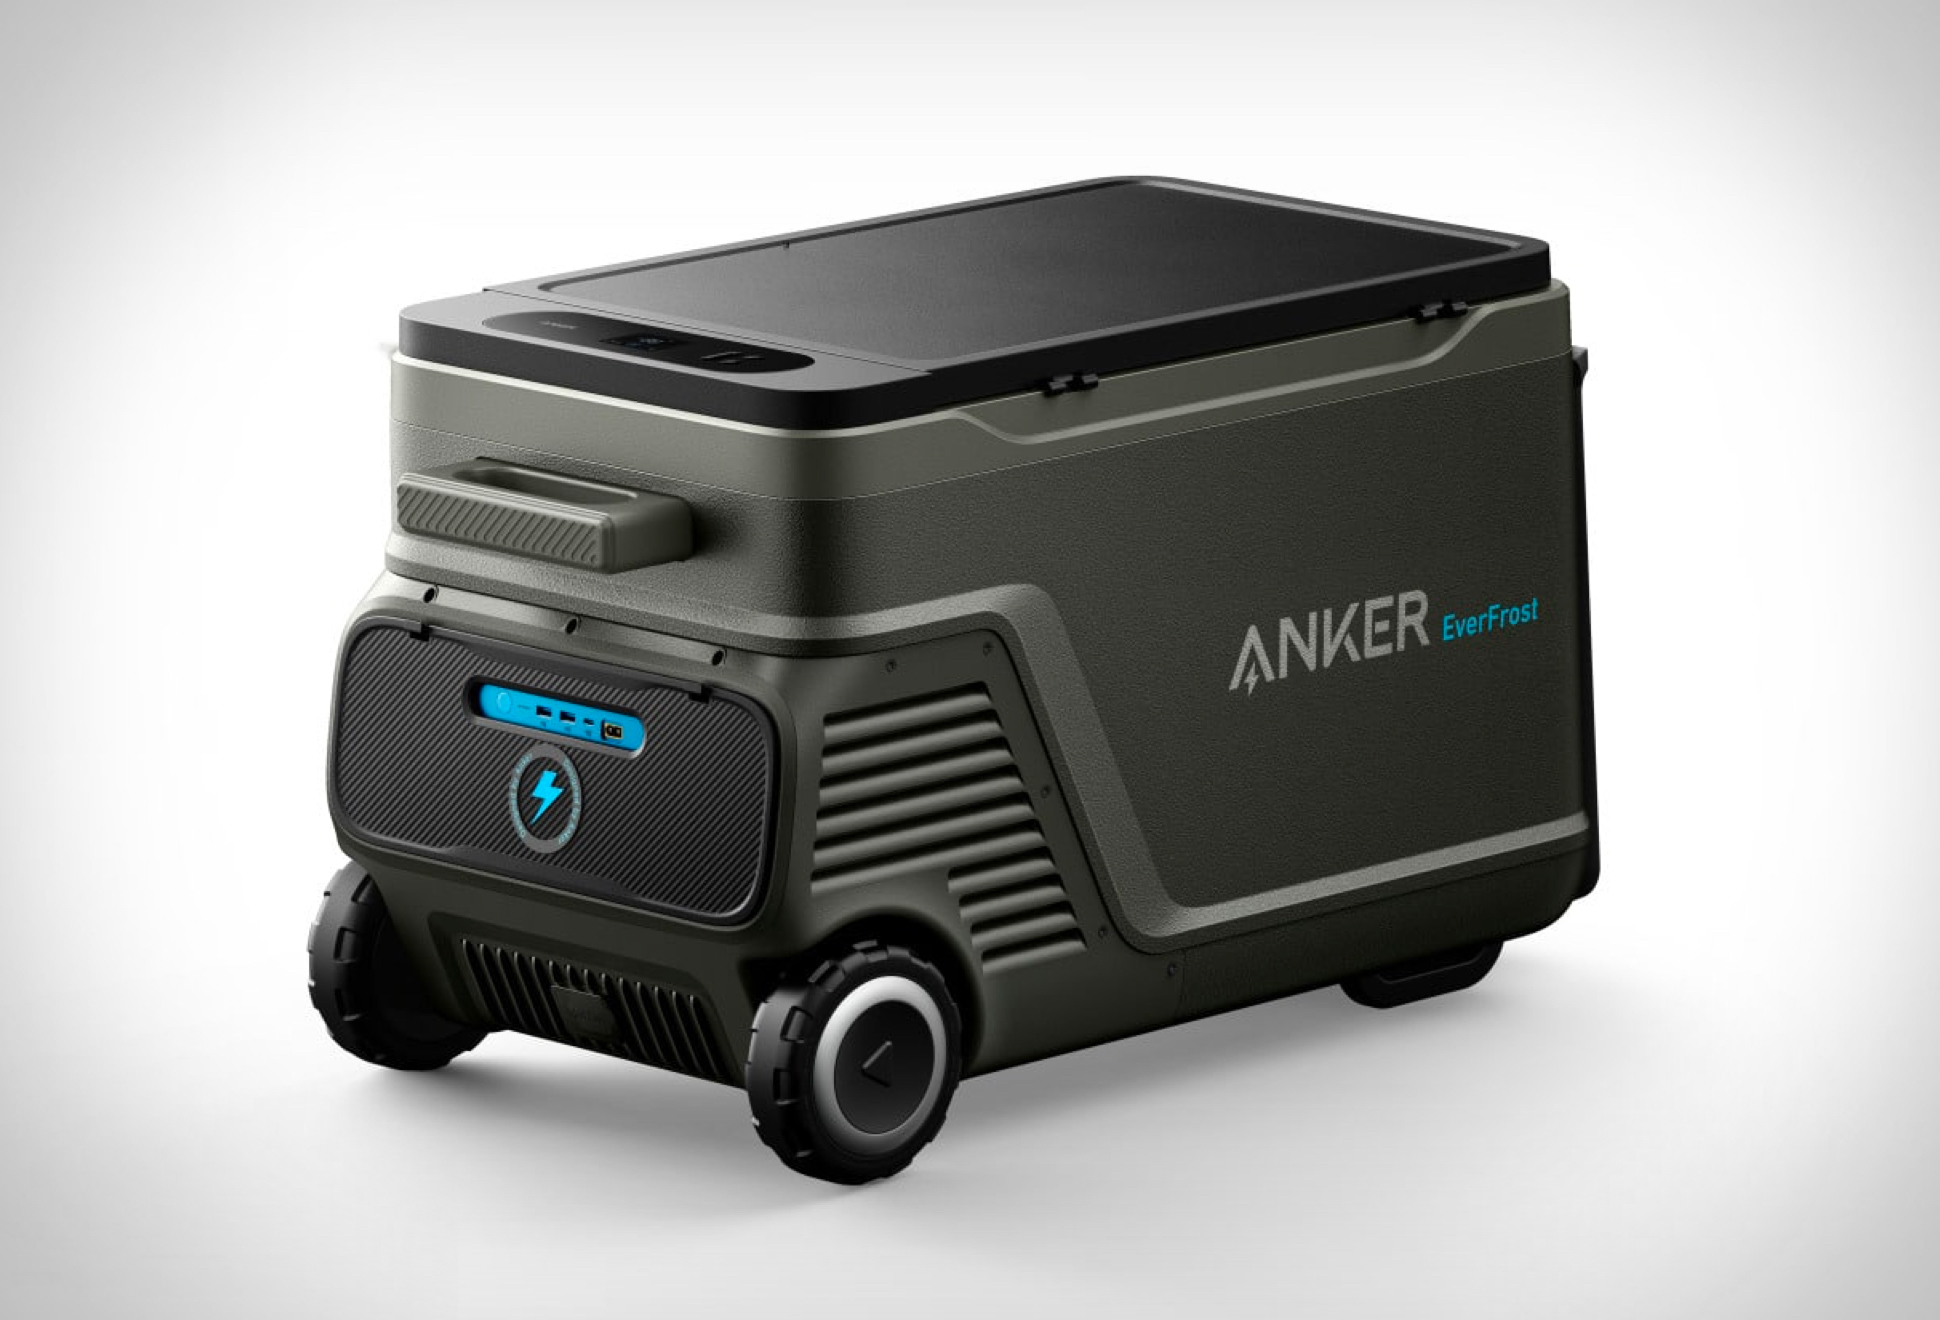 Anker EverFrost Powered Cooler | Image